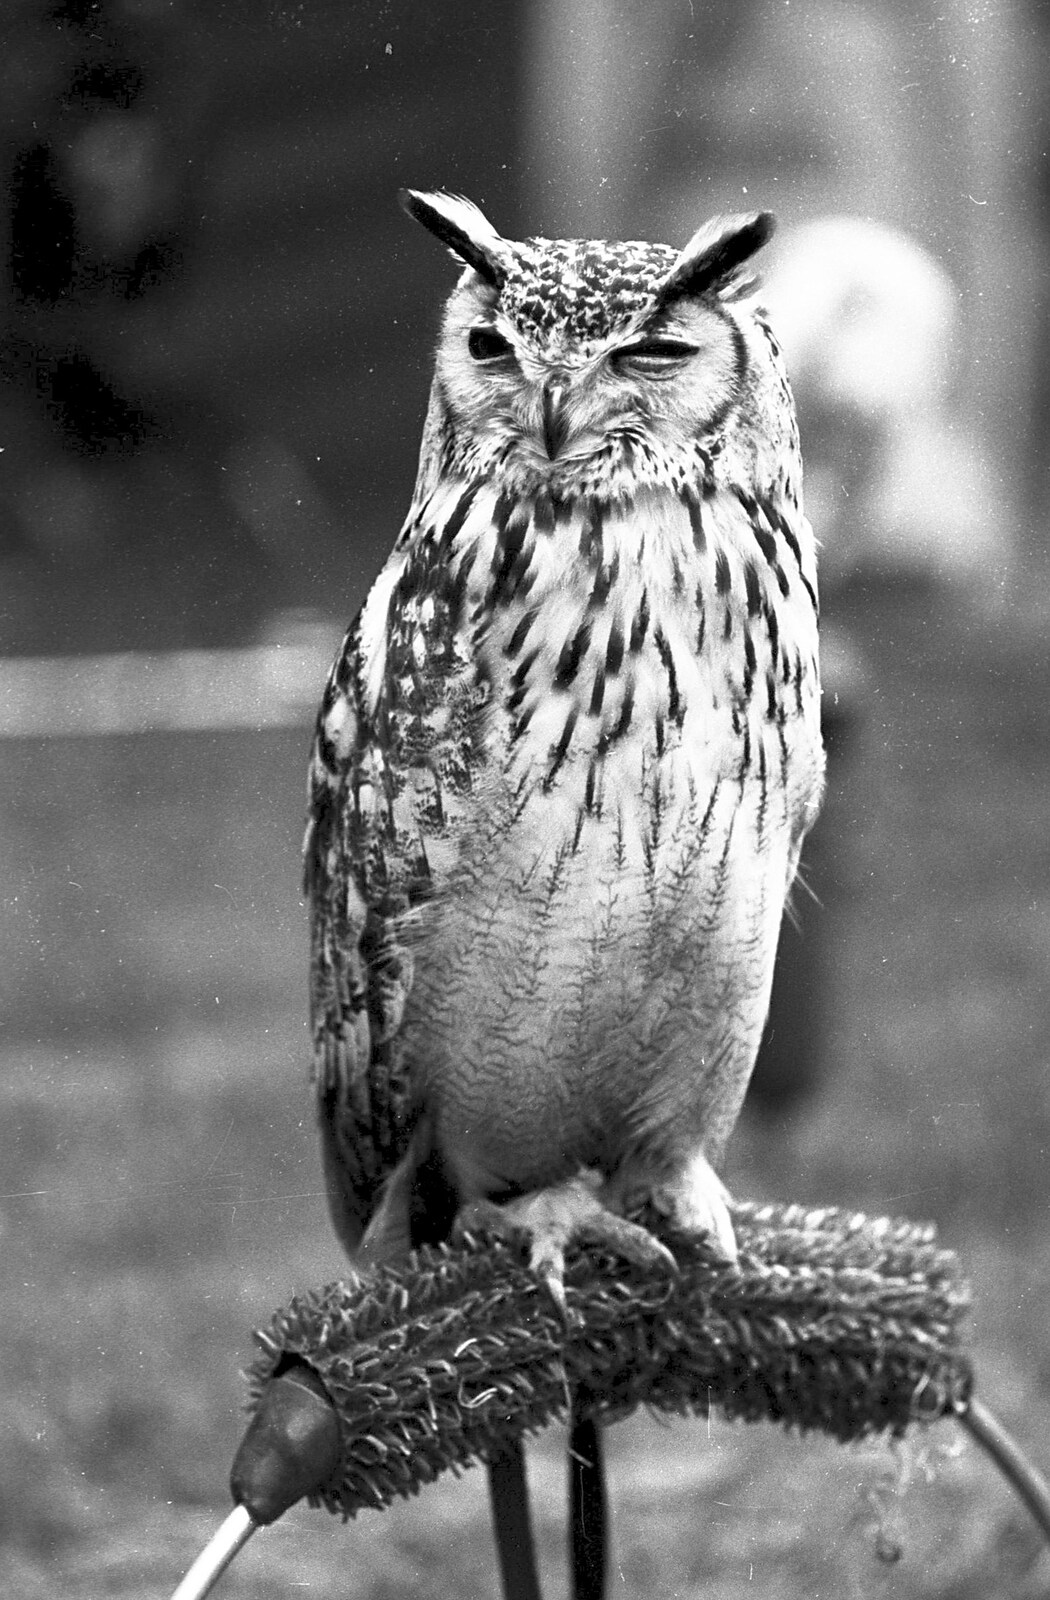 An owl scopes around from The Royal Norfolk Show, Costessey Showground, Norwich - June 20th 1994